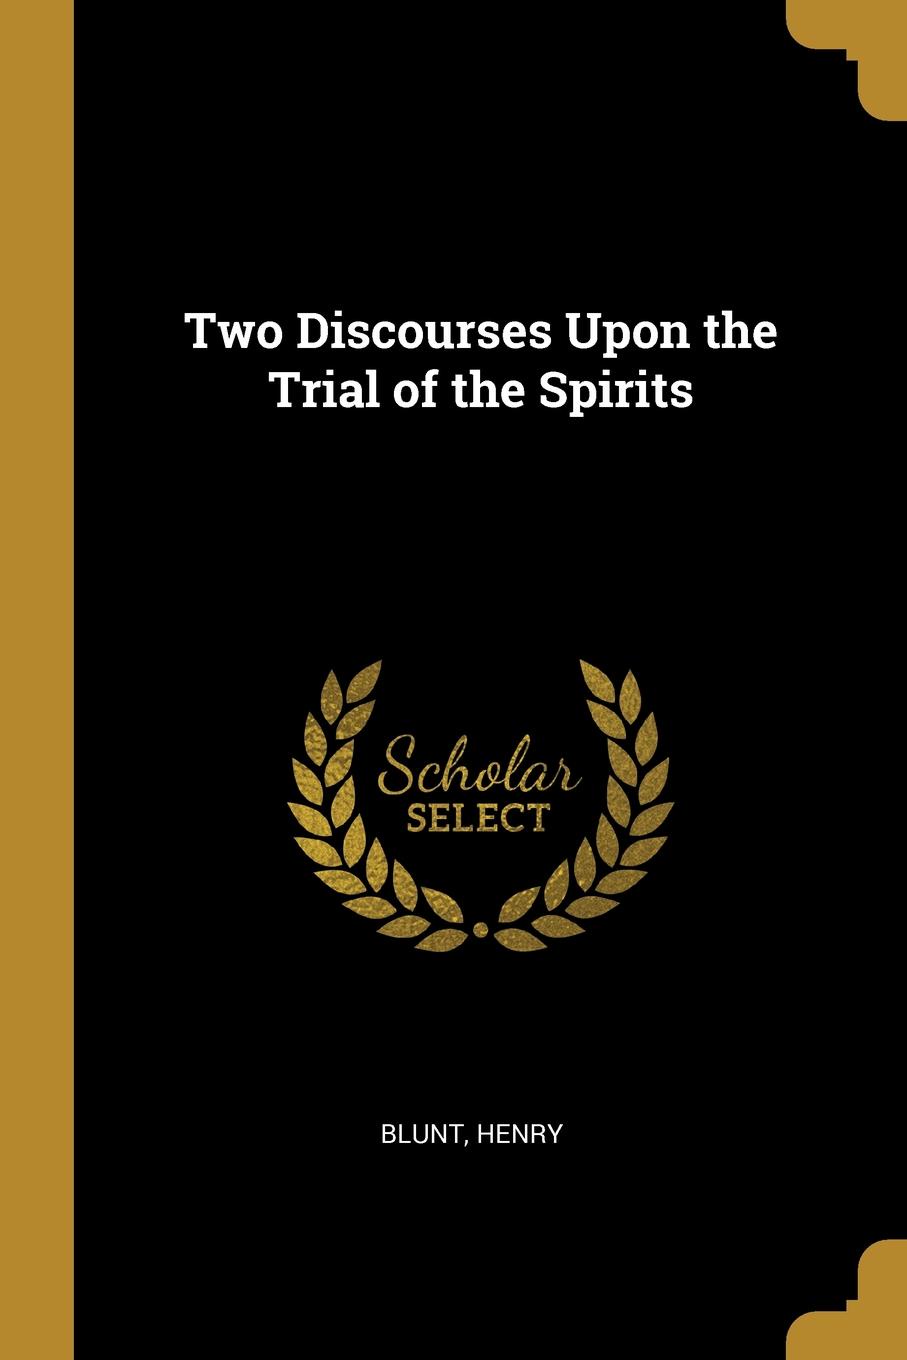 Two Discourses Upon the Trial of the Spirits